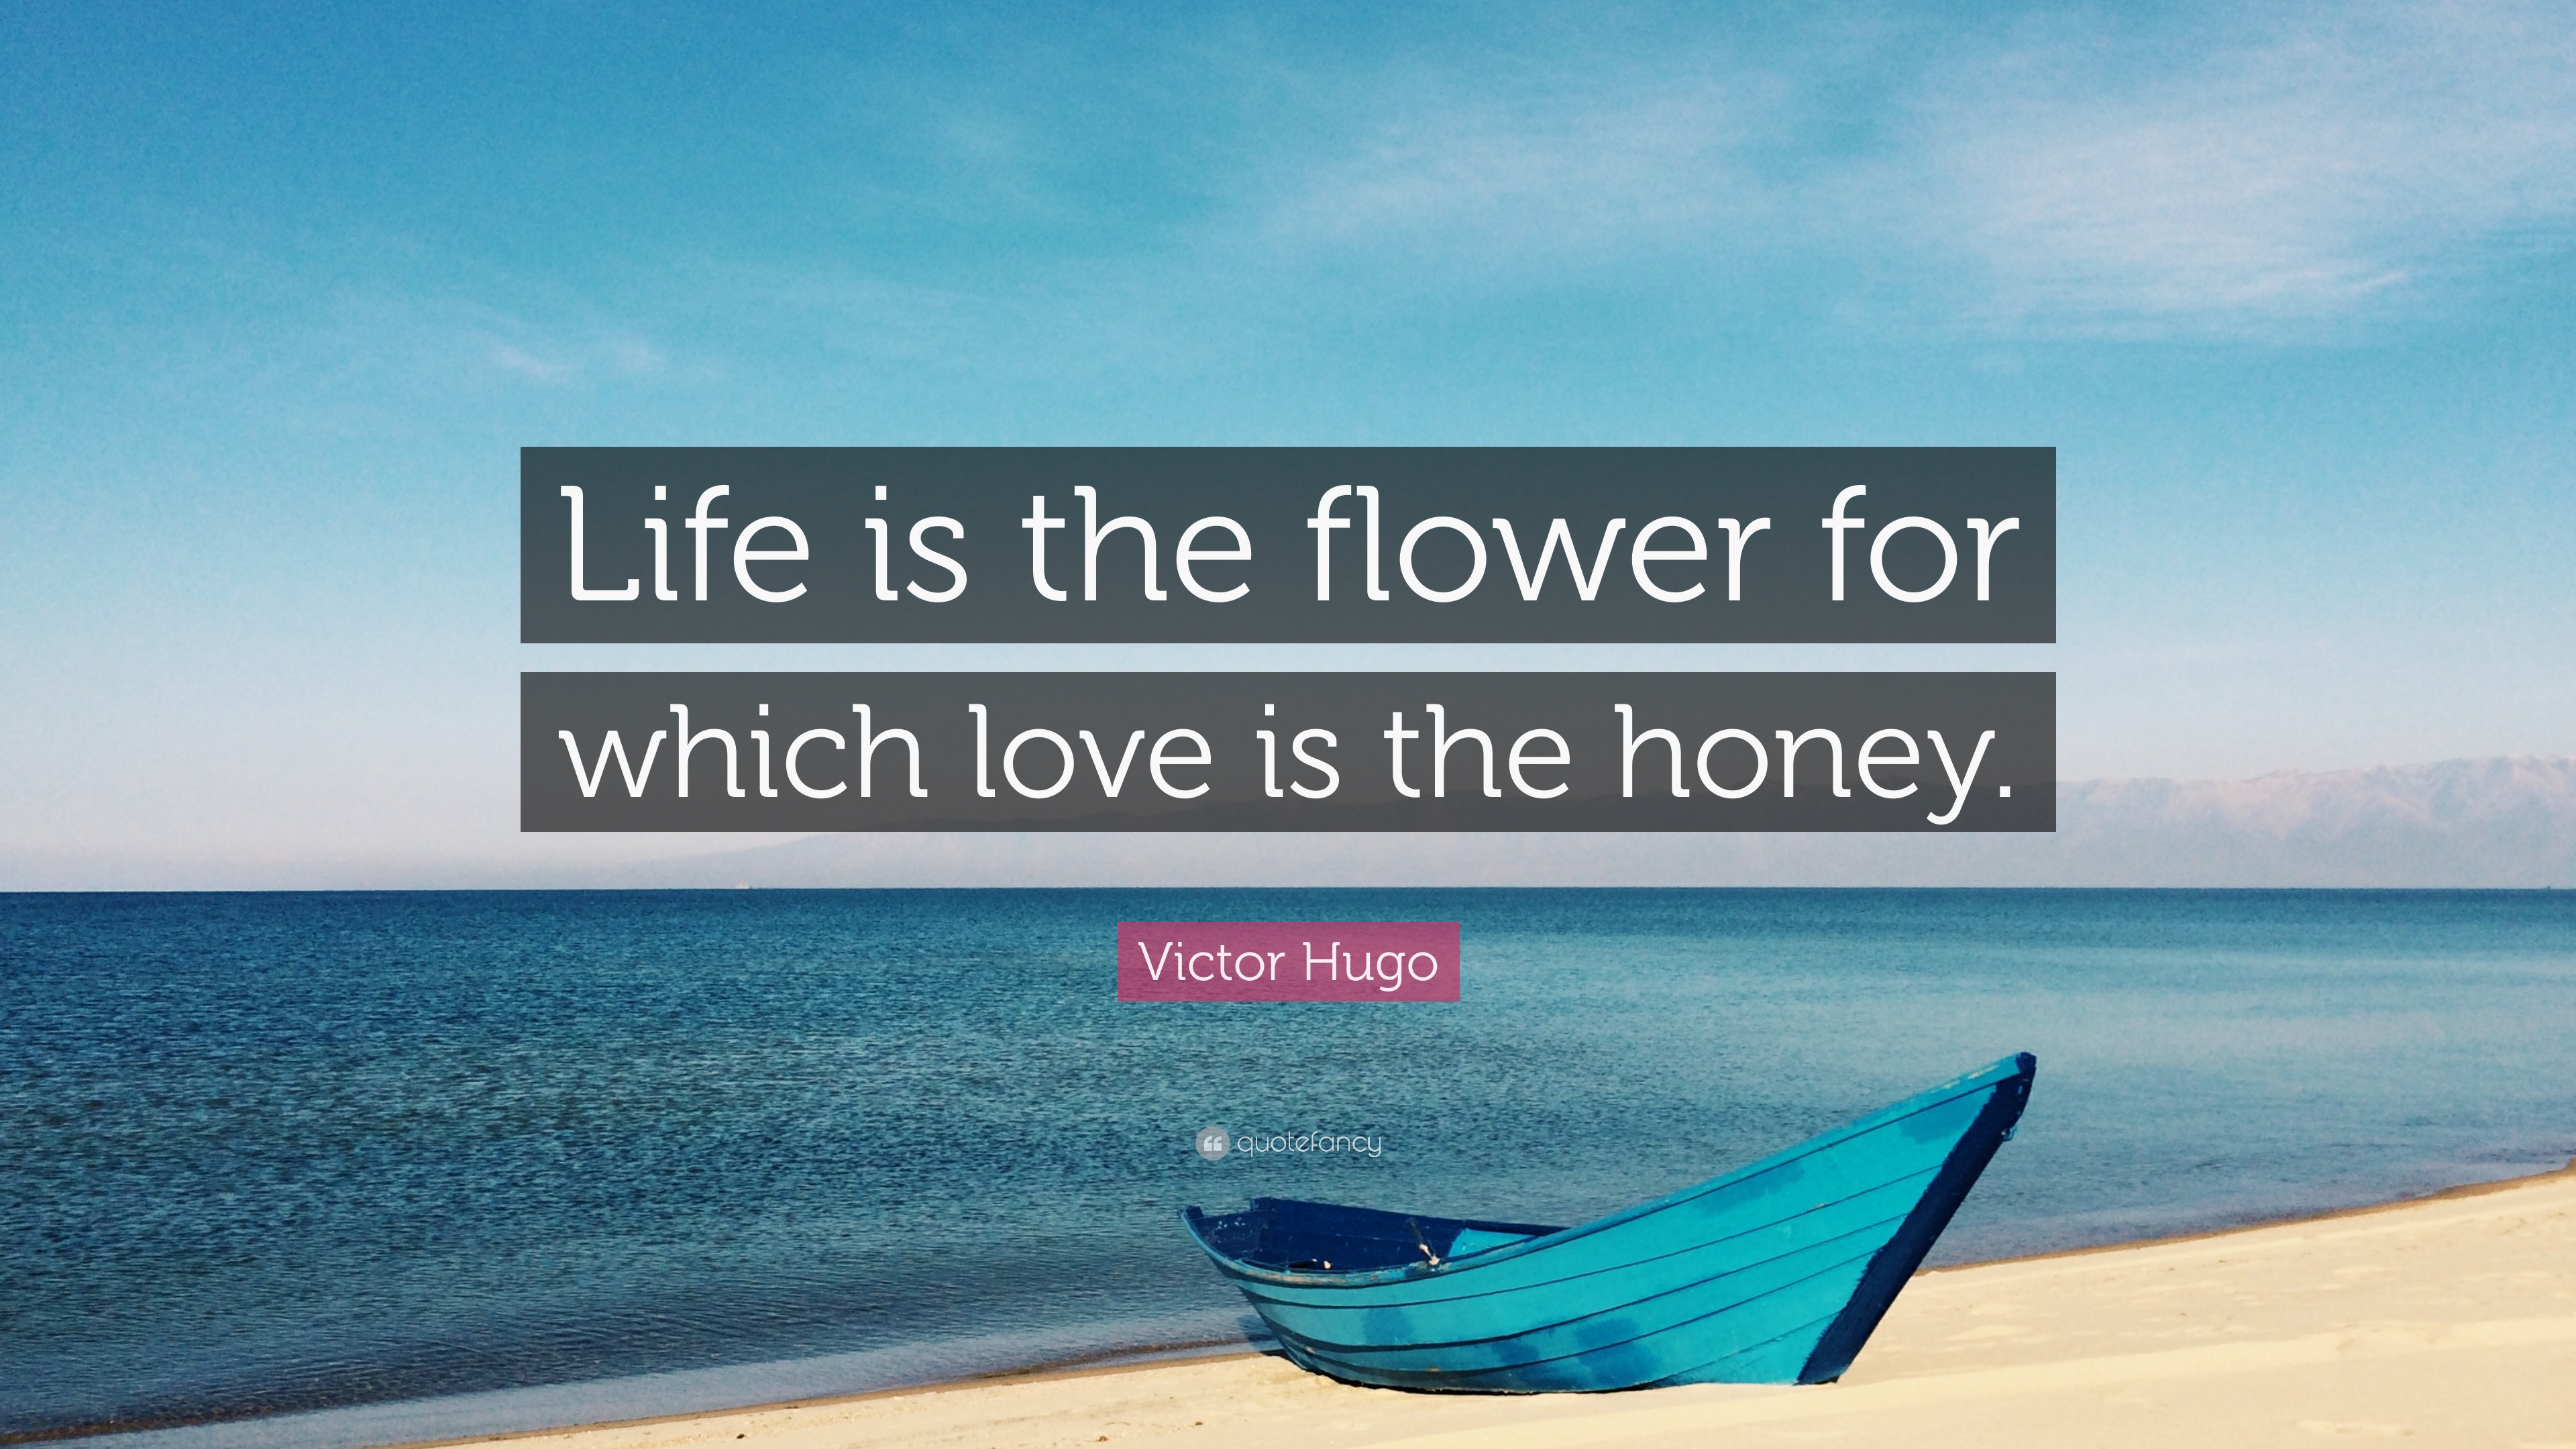 Victor Hugo Quote Life Is The Flower For Which Love Is The Honey